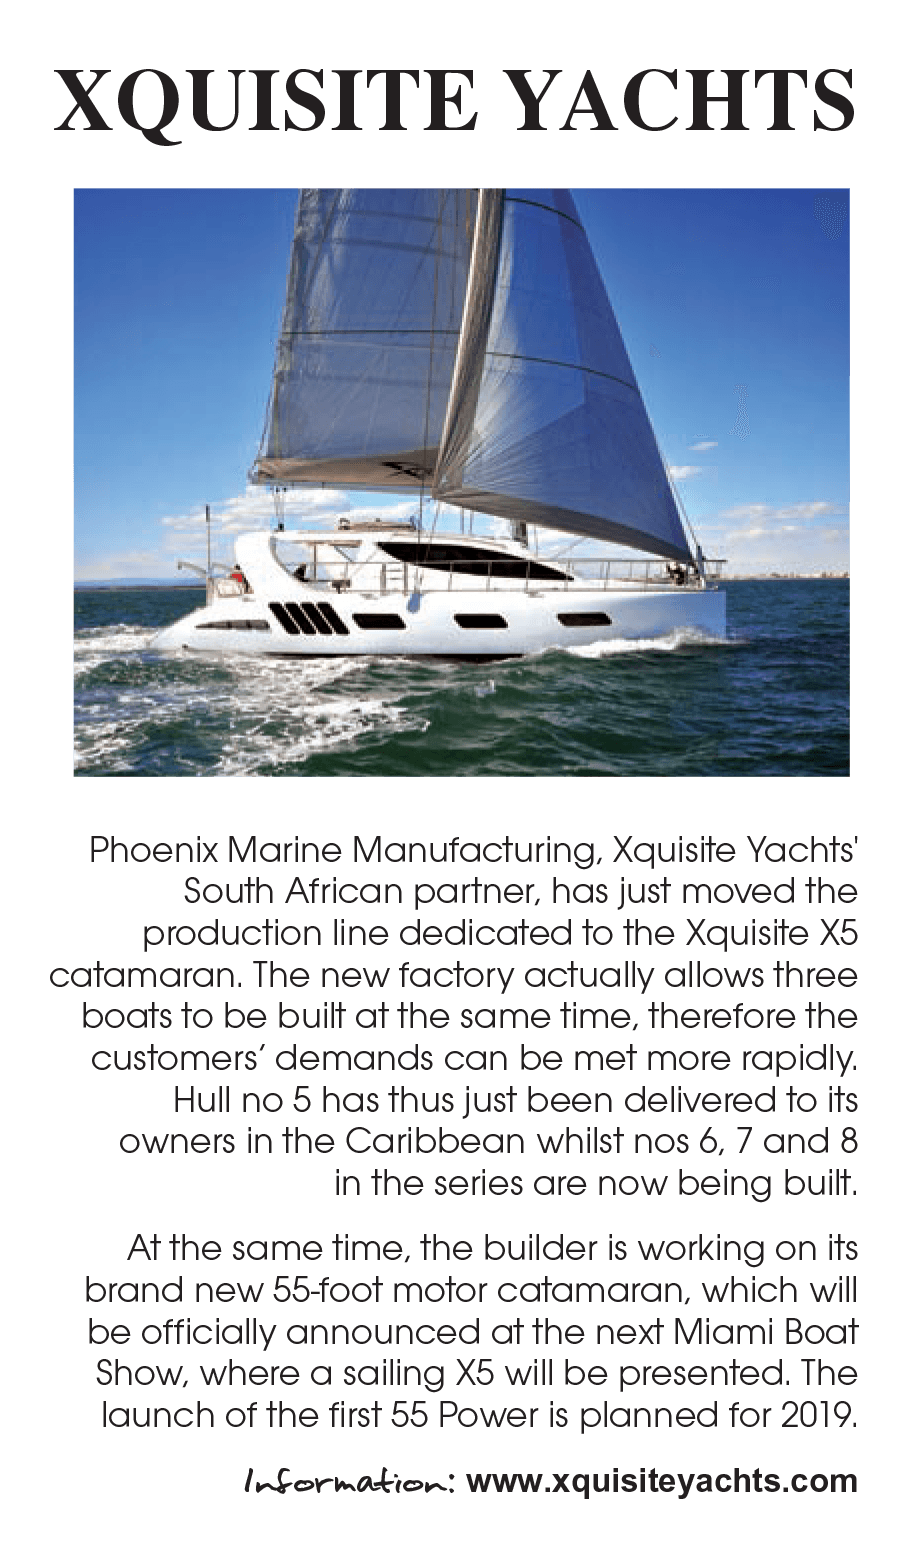 Xquisite Yachts in Multihulls World latest issue